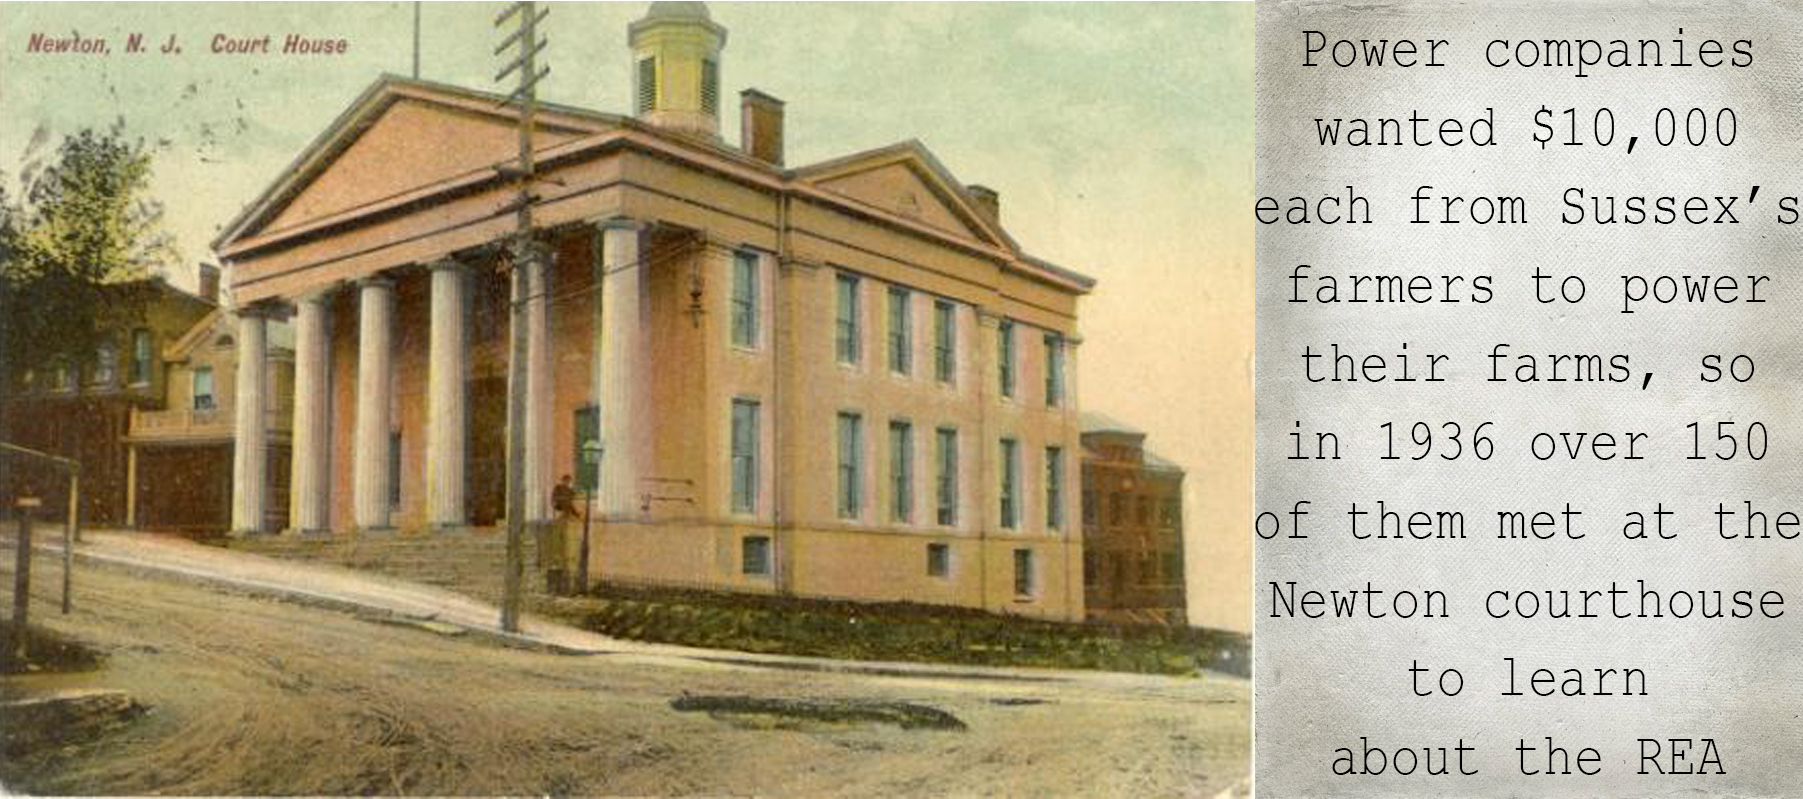 A painting of the courthouse in Newton, NJ; description reads: "Power companies wanted $10,000 each from Sussex's farmers to power their farms, so in 1936 over 150 of them met at the Newton courthouse to learn about the REA"